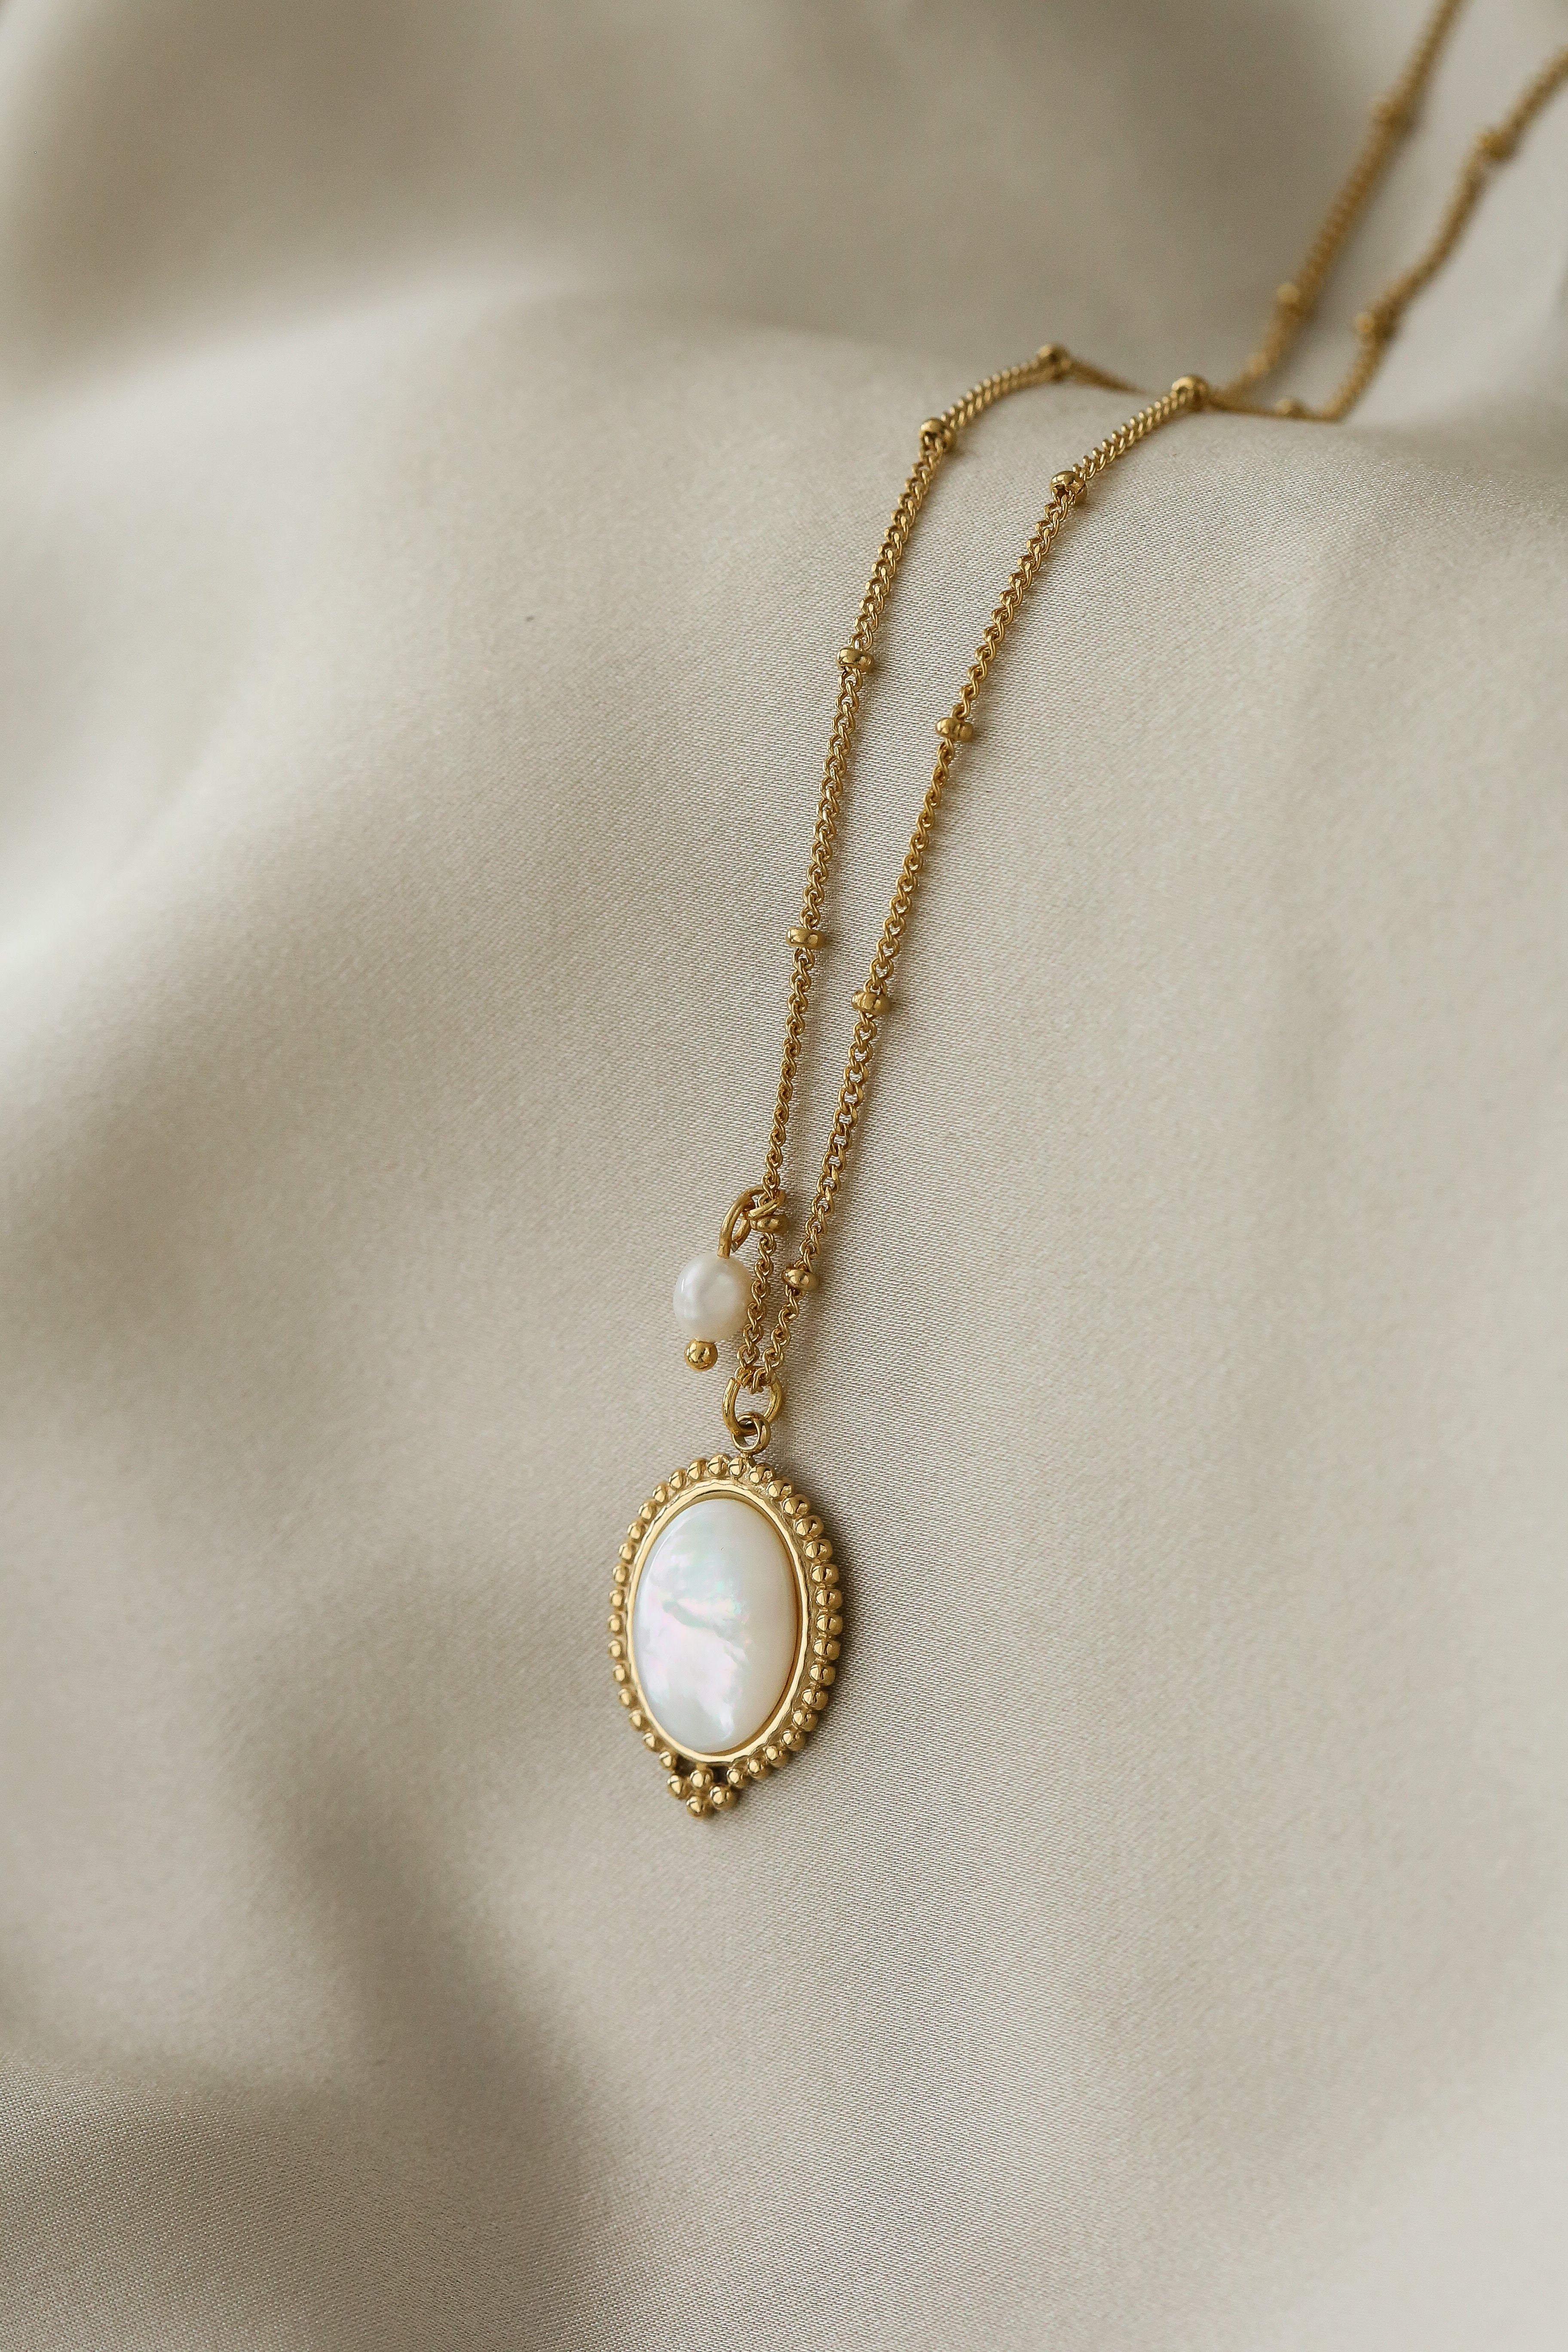 Wendy Necklace - Boutique Minimaliste has waterproof, durable, elegant and vintage inspired jewelry